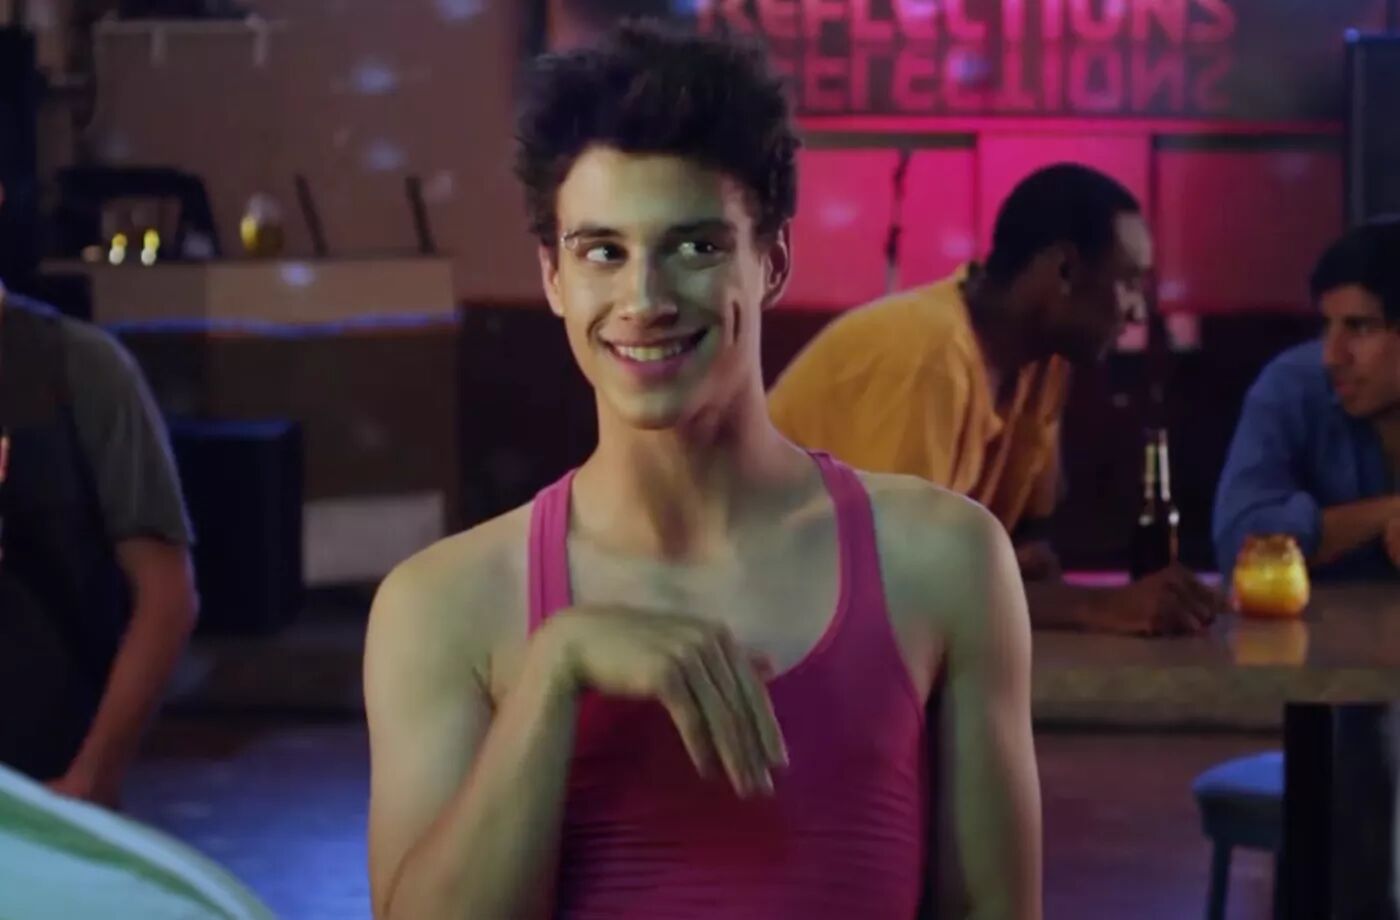 Actor Adam DiMarco stands in a gay club wearing a pink tank top, showing off his limp wrist in 2014 film 'Date and Switch.'